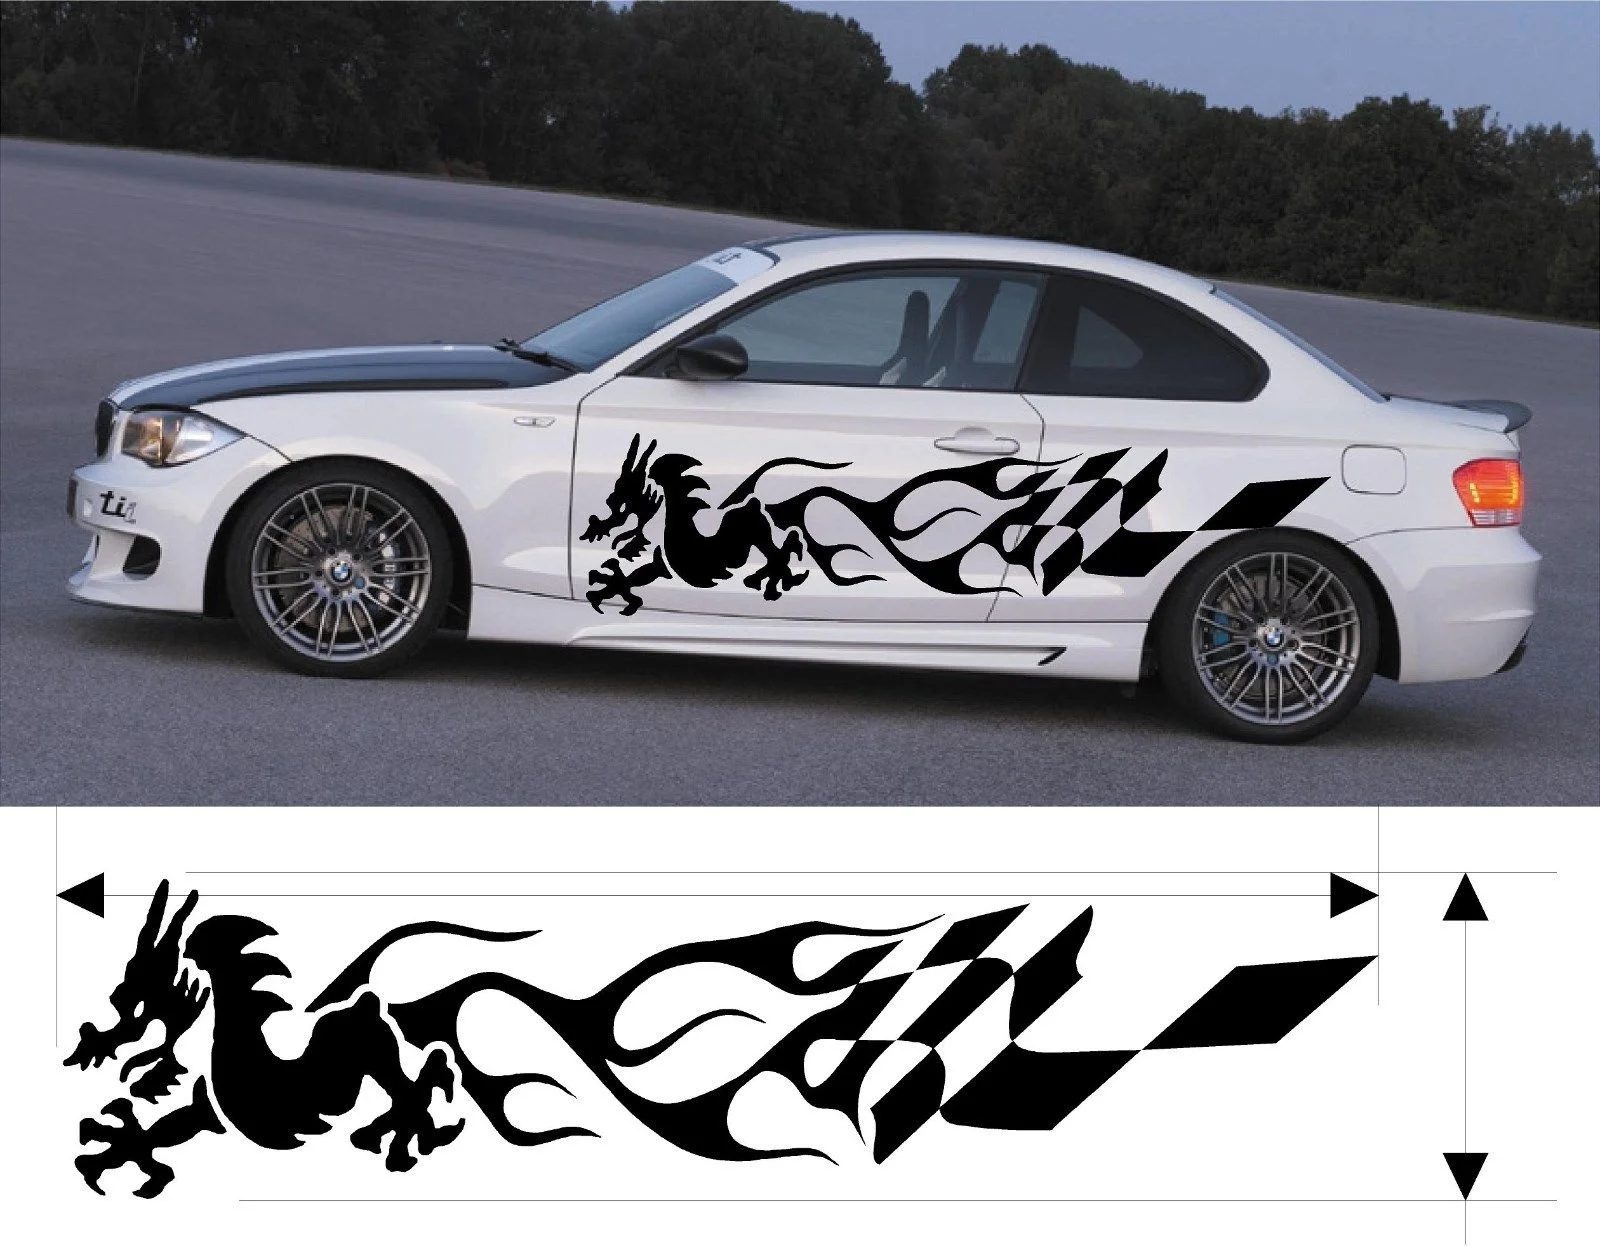 

For 2Pcs VINYL GRAPHICS DECAL KITS CAR DRAGON TRUCK CUSTOM SIZE COLOR VARIATION F1-62 Car styling